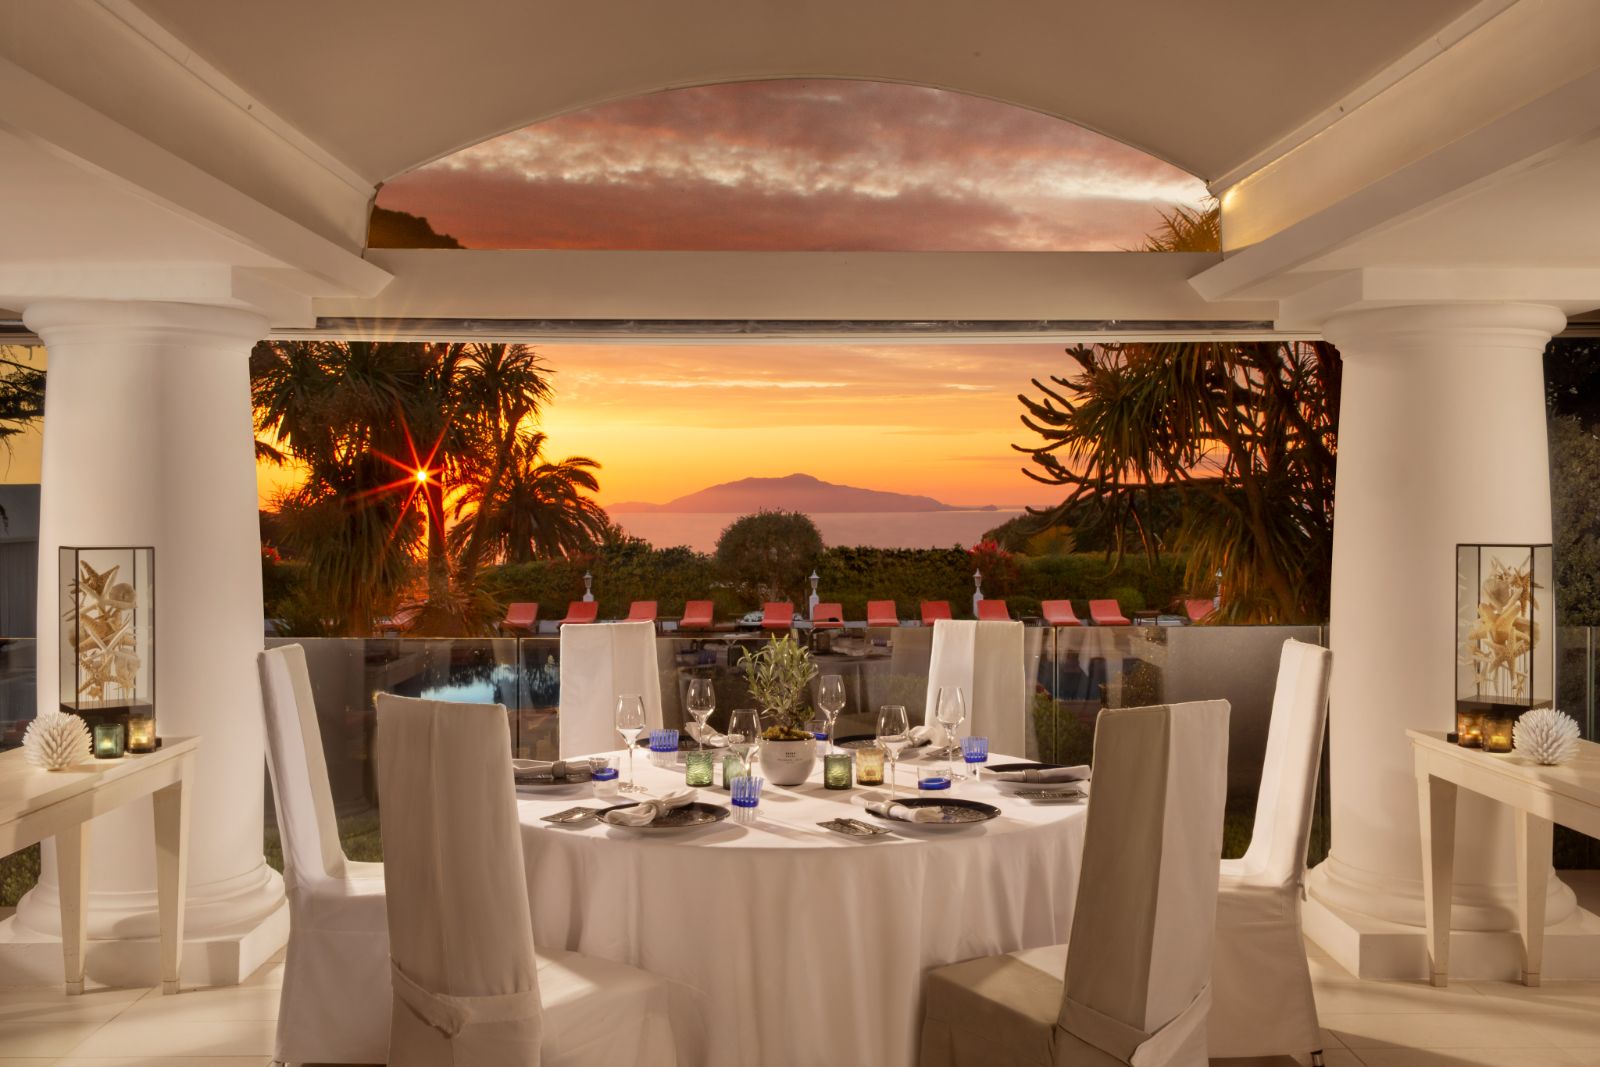 Luxury Hotel Capri Palace Jumeirah in Anacapri Restaurant L Olivia with Open View to Sunset